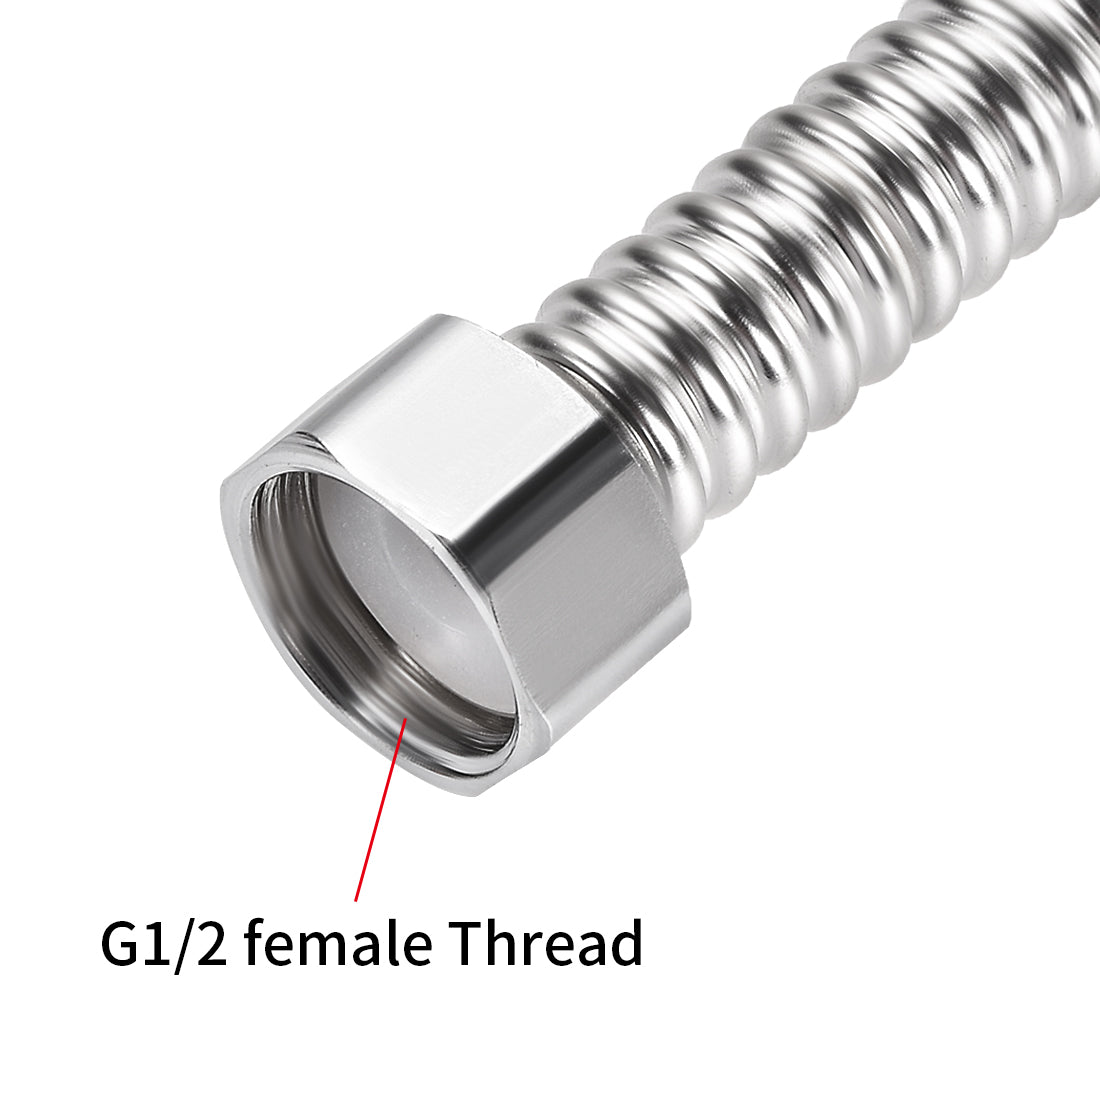 uxcell Uxcell Corrugated Stainless Steel Flexible Water Line 39.4inch Long G1/2 Female Threaded Connector with Washer